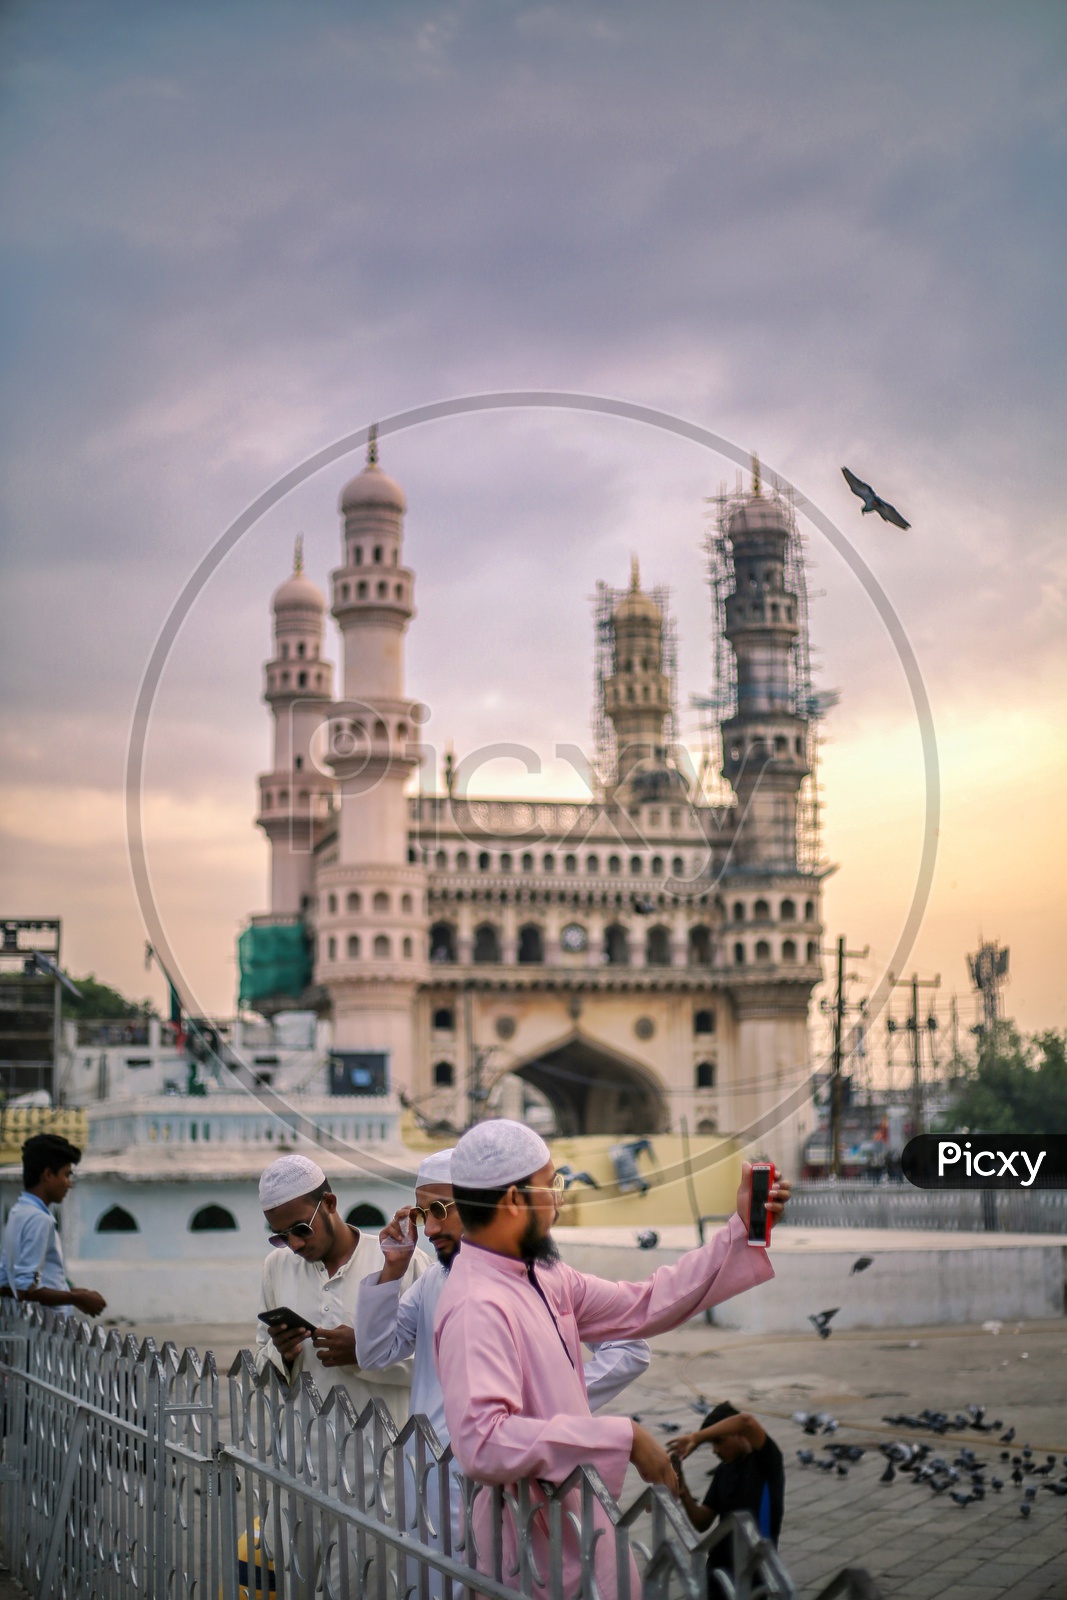 A Muslim man Taking Selfie In Mecca Masjidh  With Charminar in Background